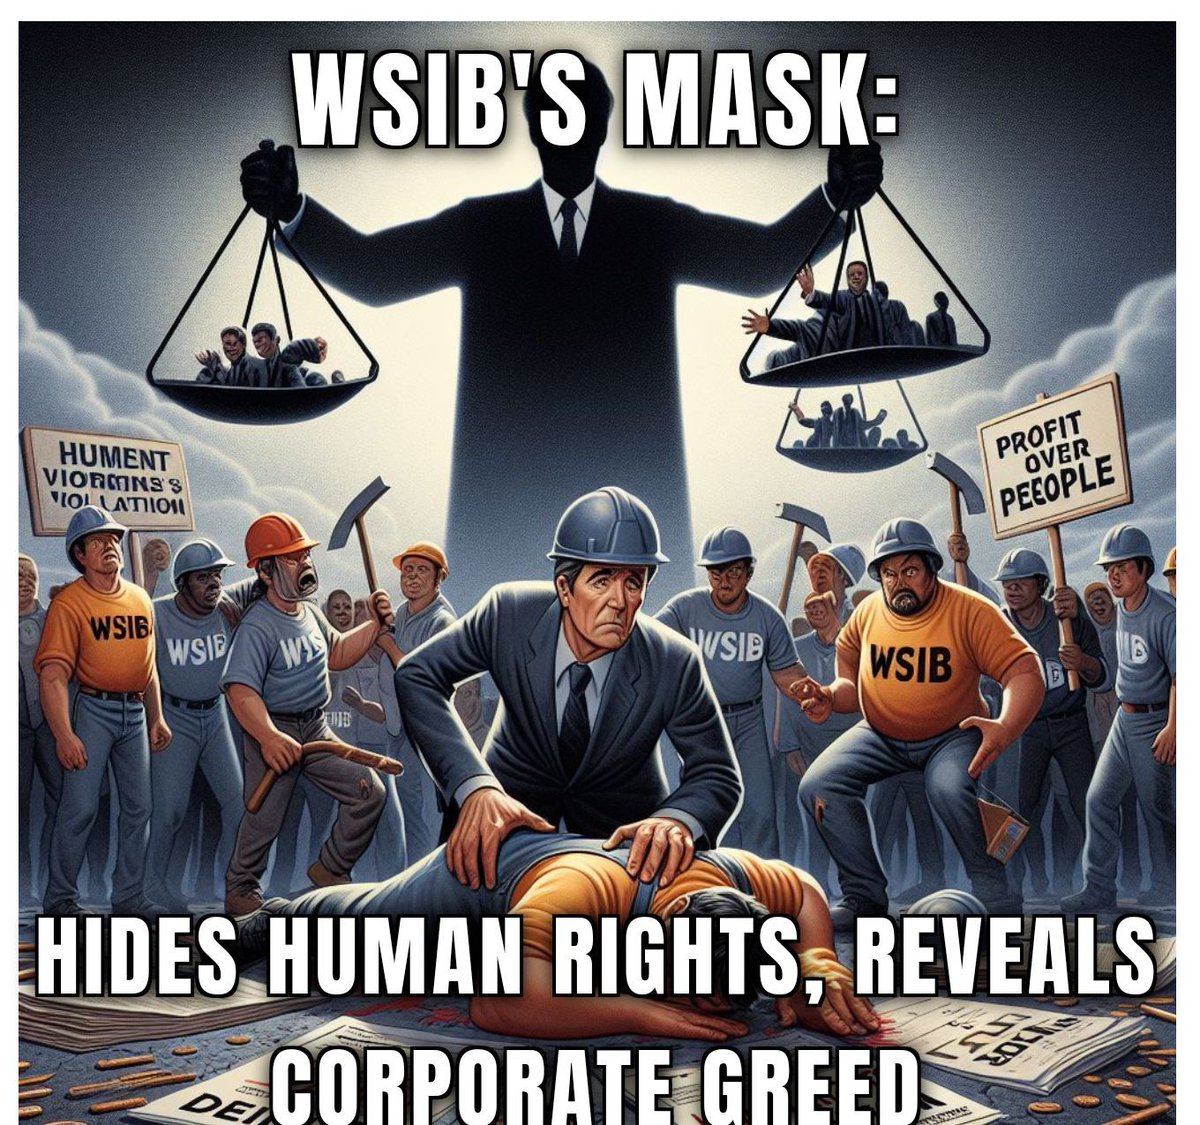 WSIB's mask: hides human rights, reveals corporate greed. 
Let's unveil the truth and demand fair treatment for all workers! #InjuredWorkers #CorporateGreed #JusticeForAll